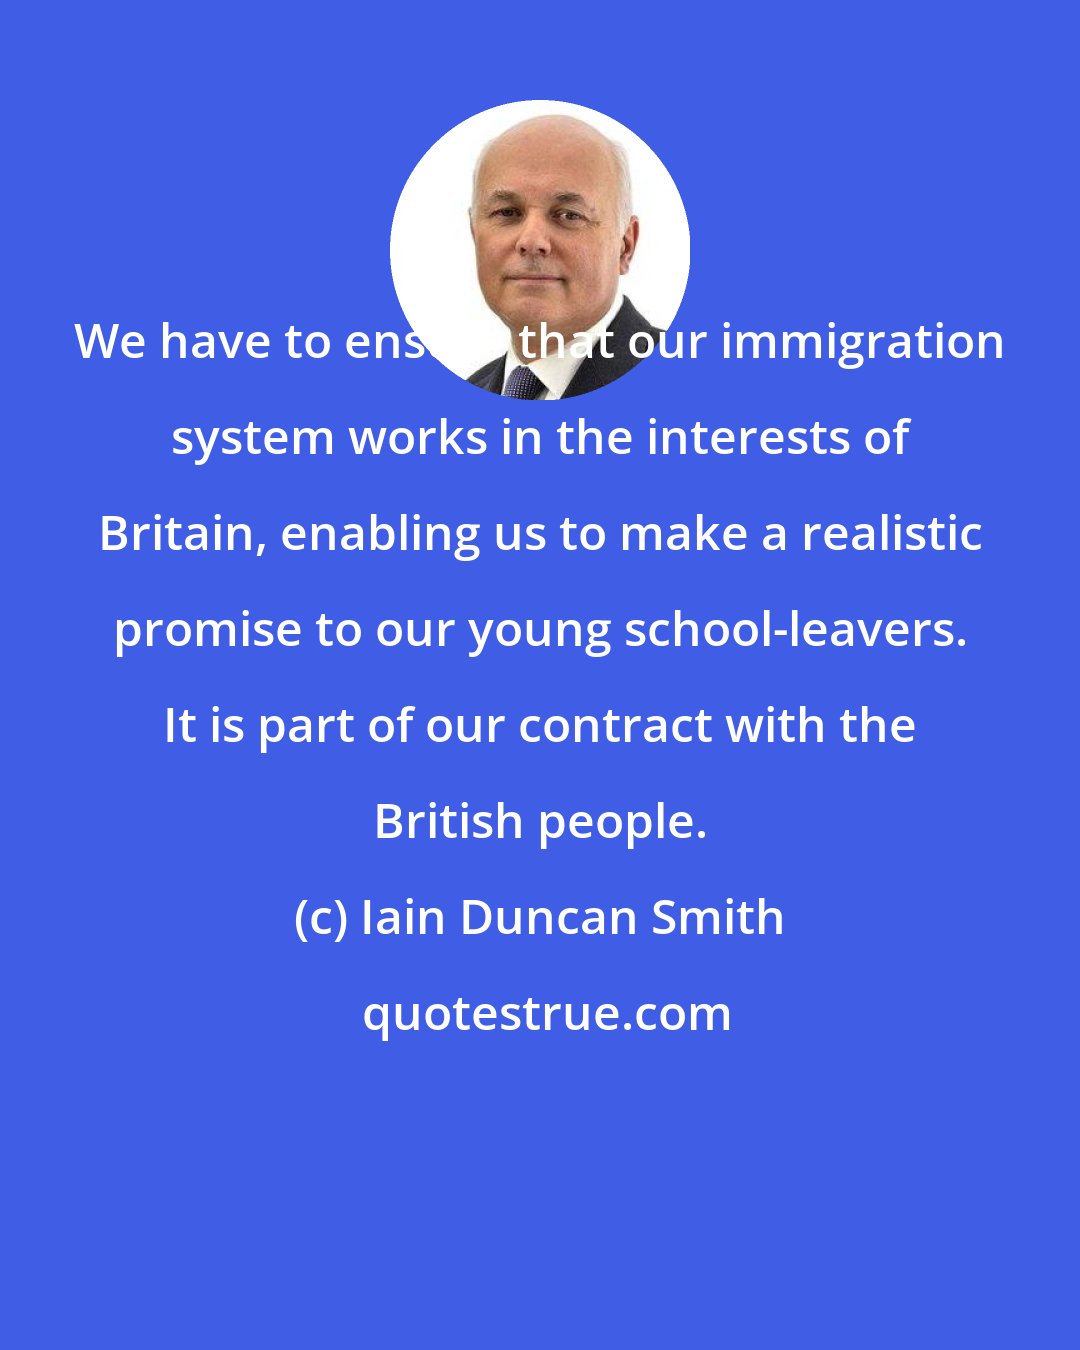 Iain Duncan Smith: We have to ensure that our immigration system works in the interests of Britain, enabling us to make a realistic promise to our young school-leavers. It is part of our contract with the British people.